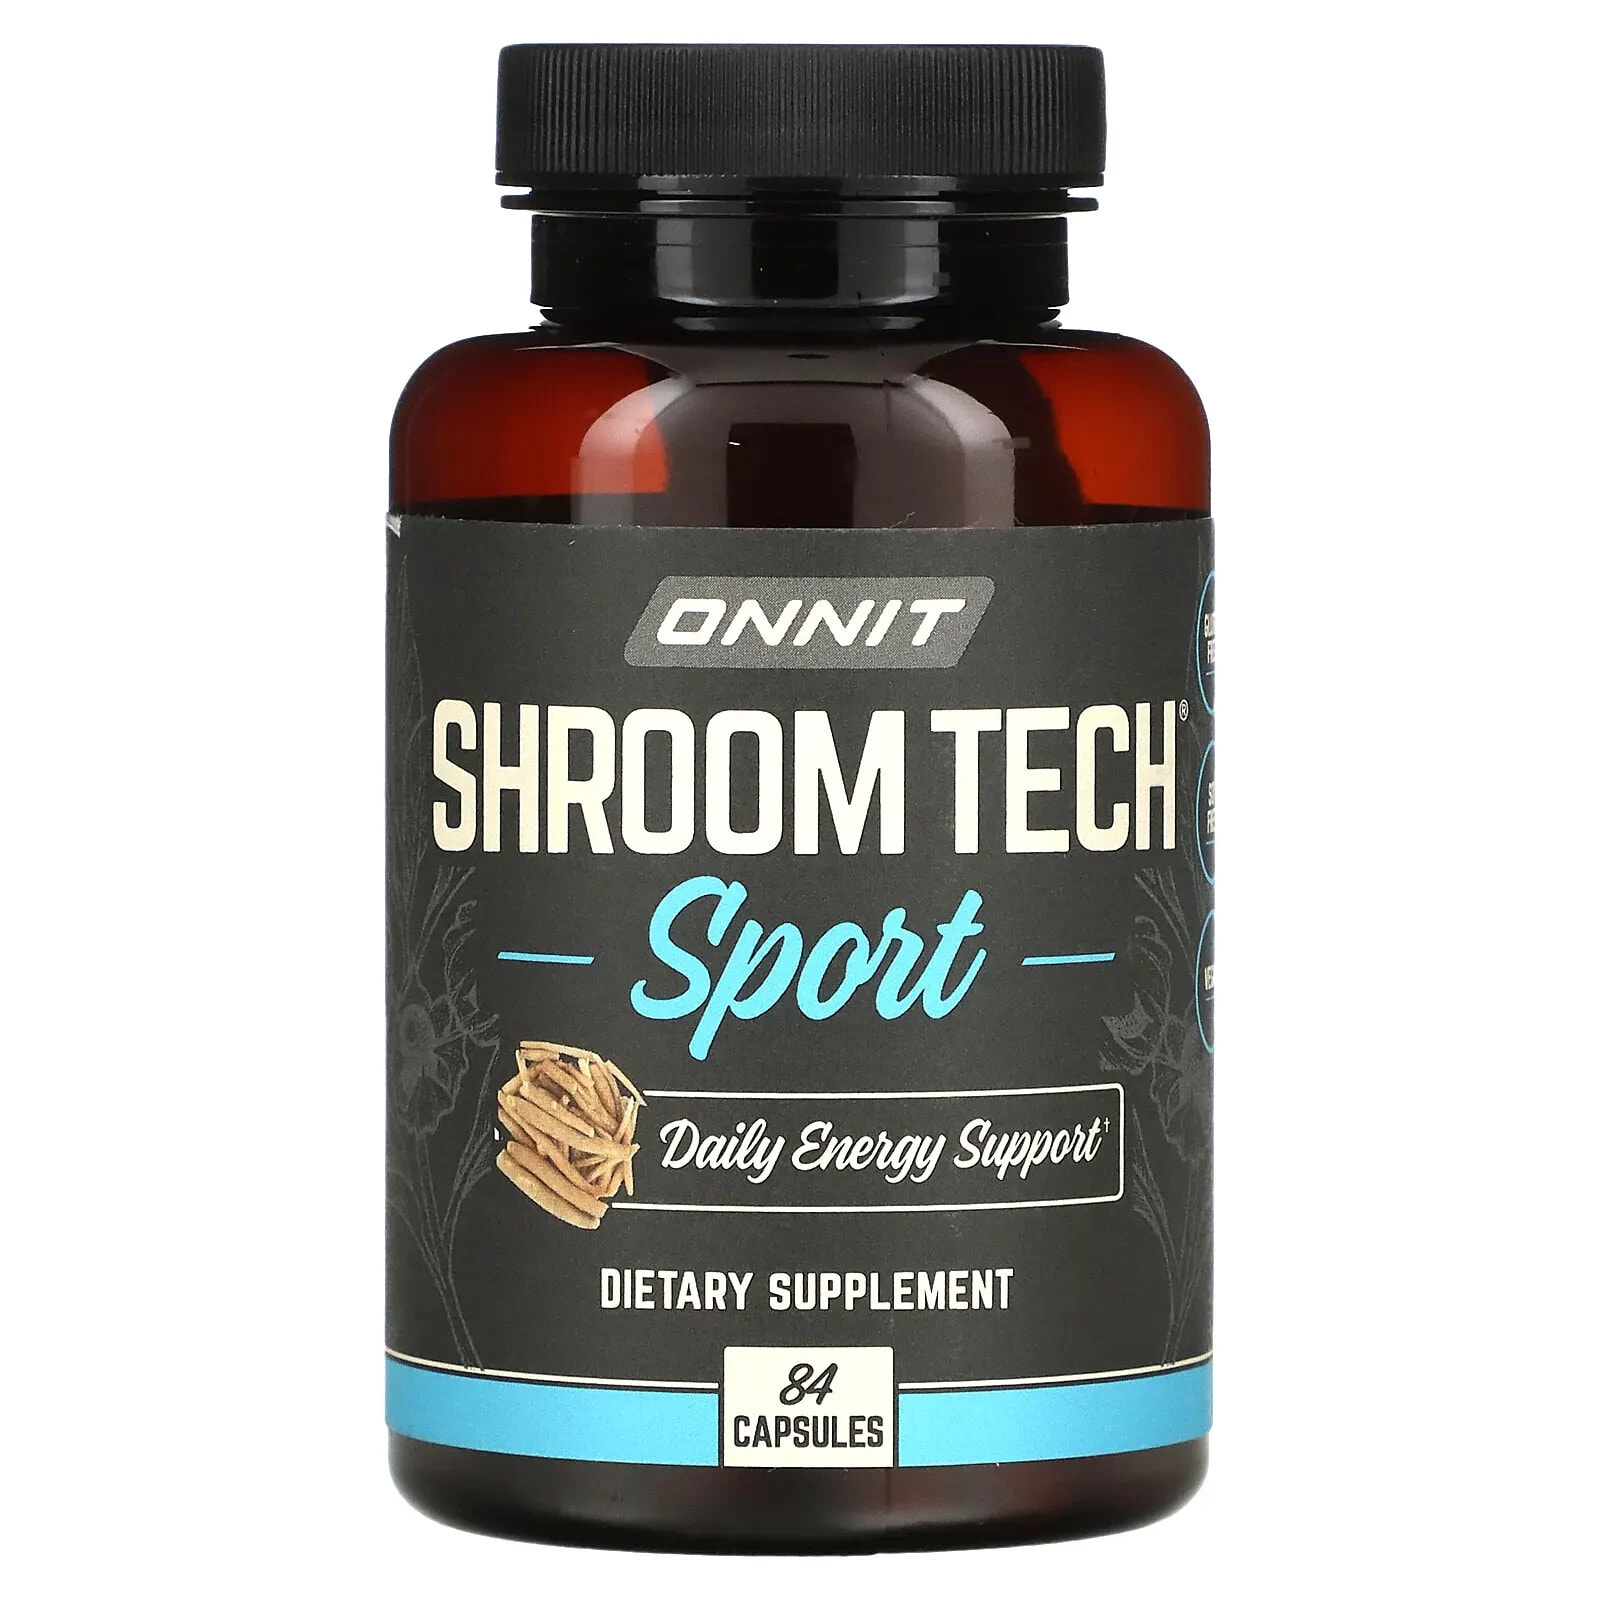 Shroom Tech Sport, Daily Energy Support, 84 Capsules